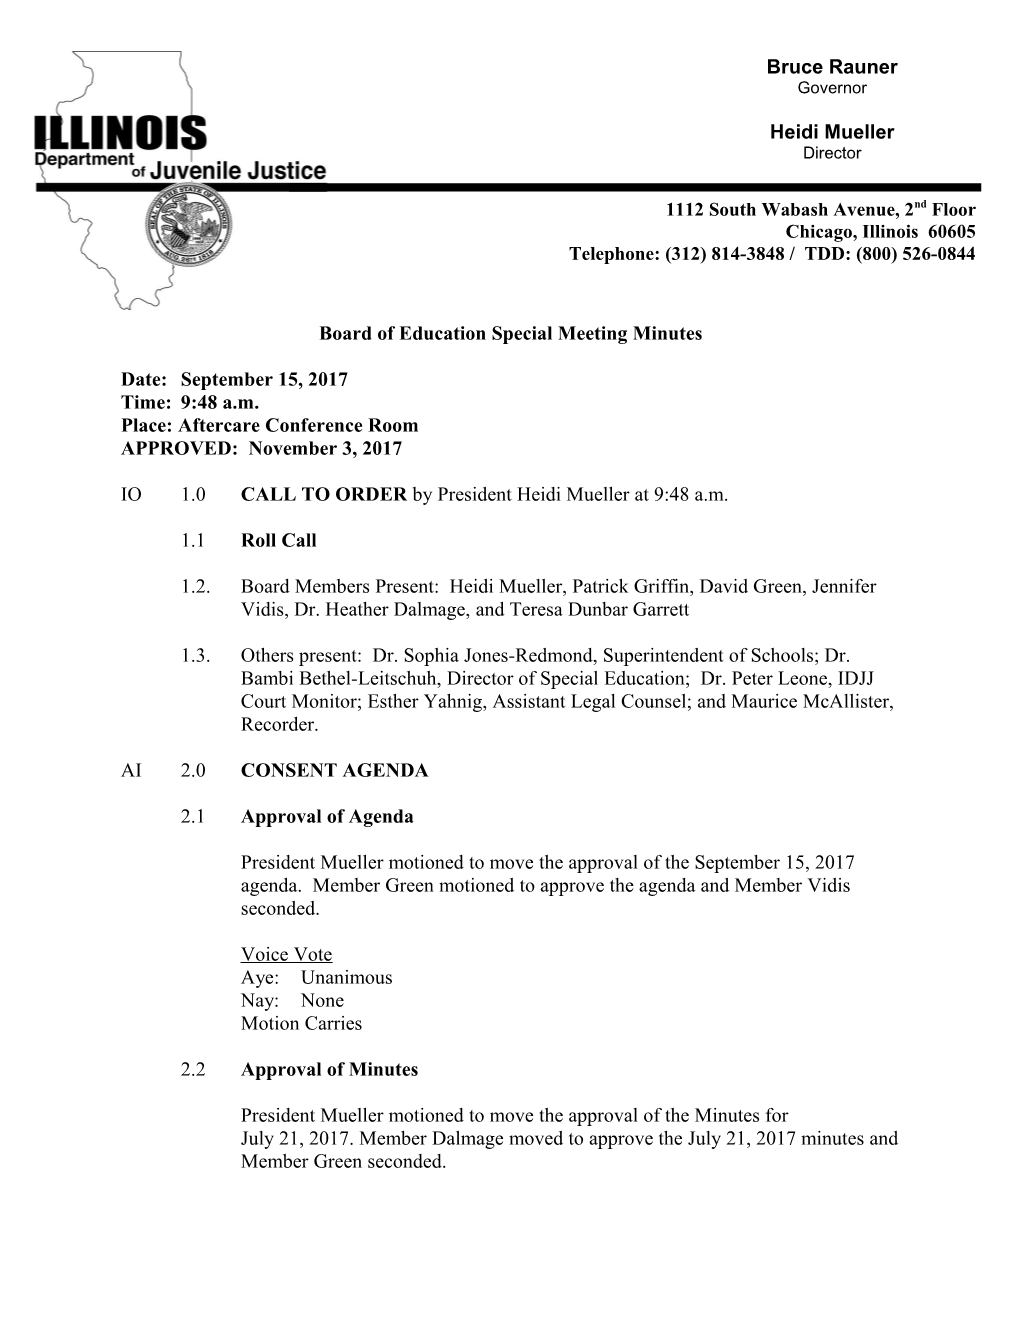 Board of Education Special Meeting Minutes